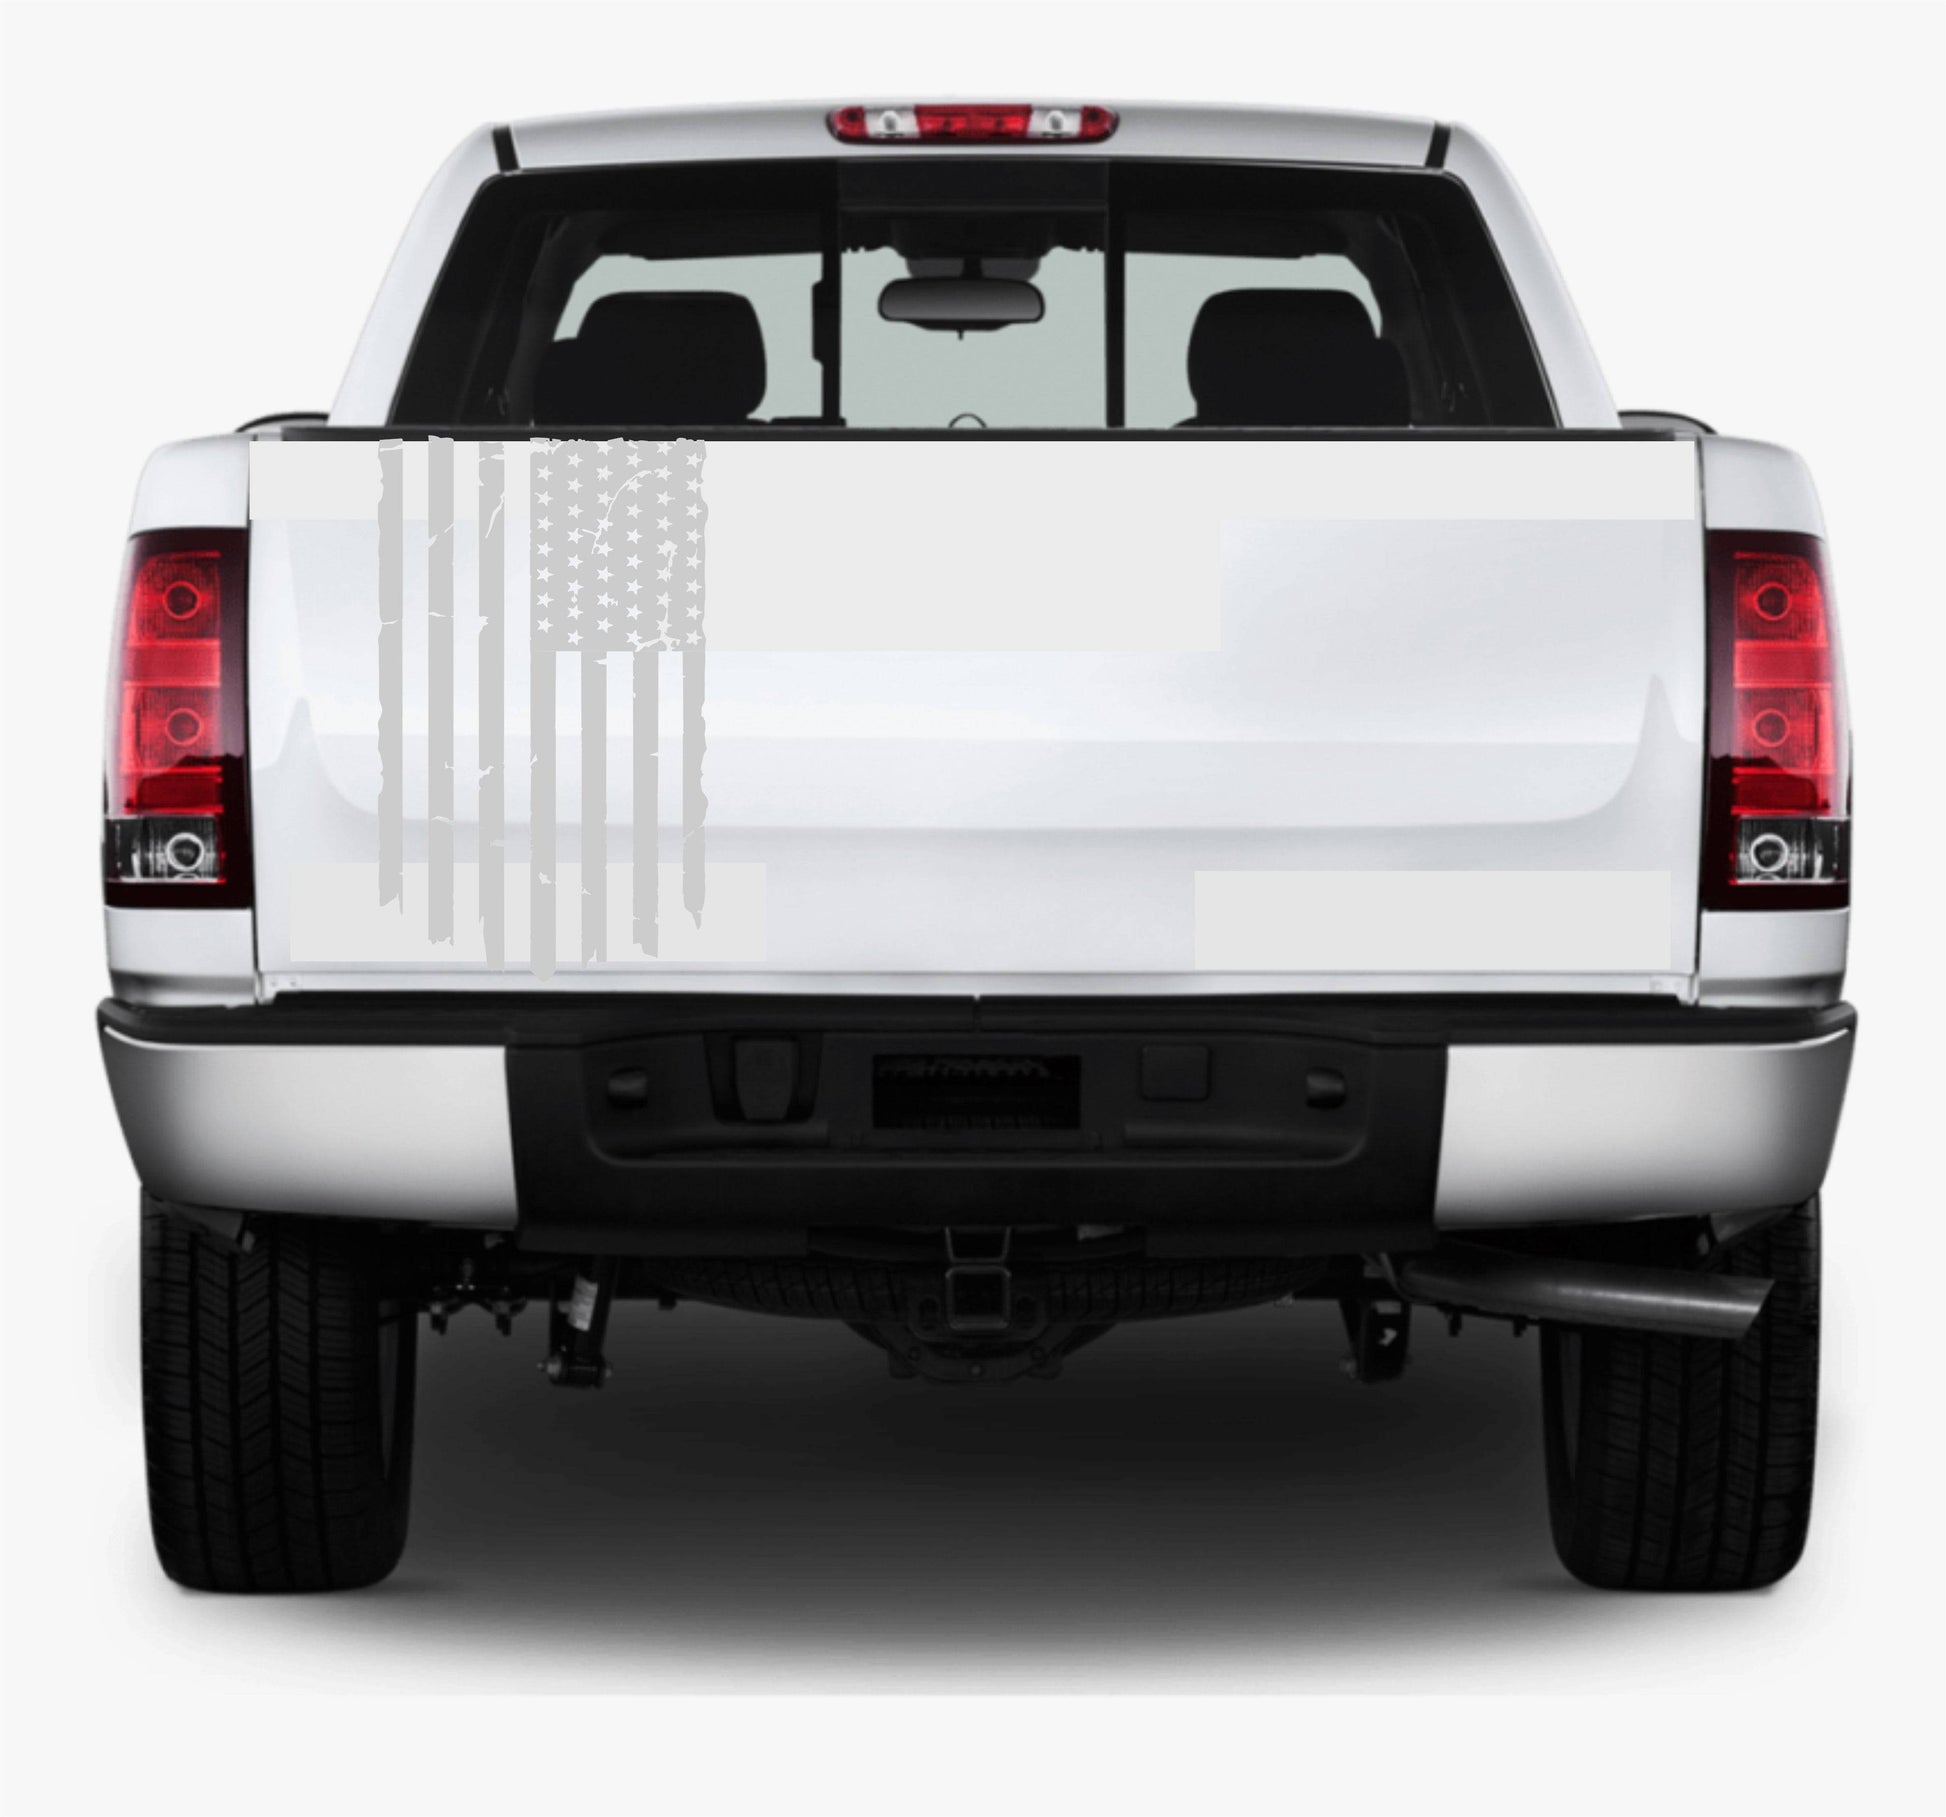 Copy of Distressed American Flag Decal Stickers | Patriotic Vinyl Decal for Any Trucks, SUV's, Vans, Tailgates, Bumpers...